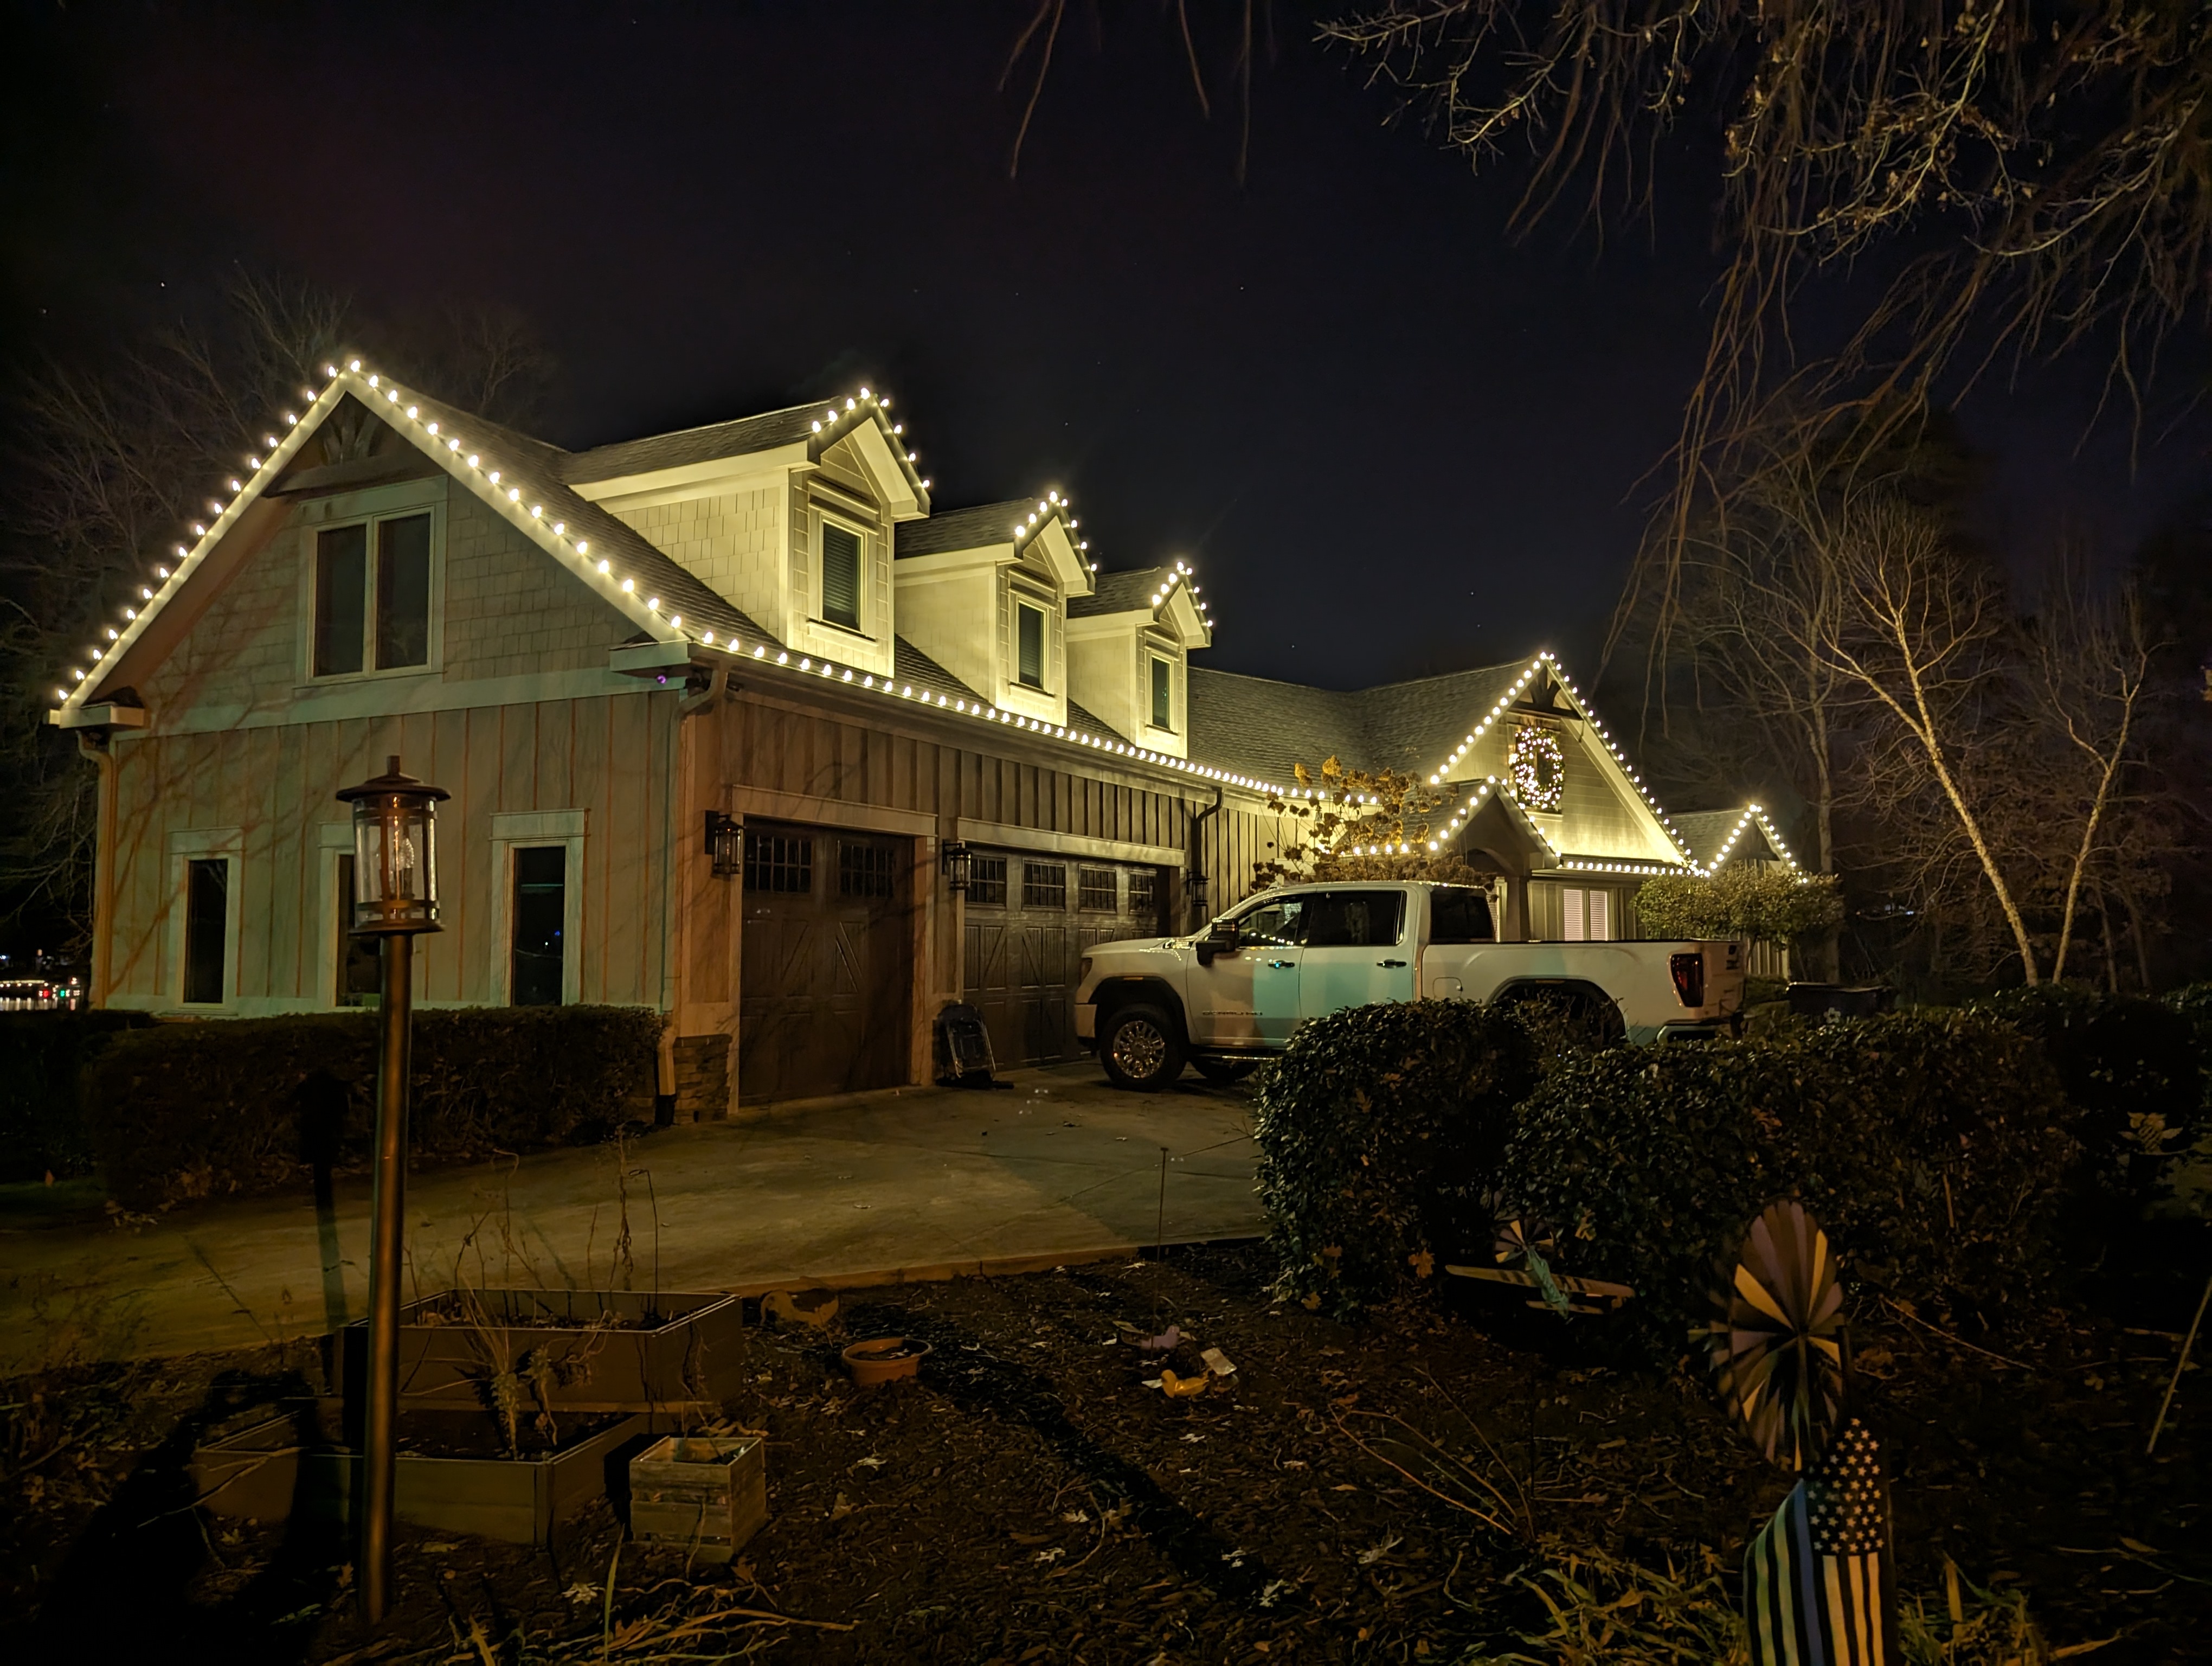 Transforming Winter Nights into a Dazzling Display - Another Christmas Light Installation in Denver, NC